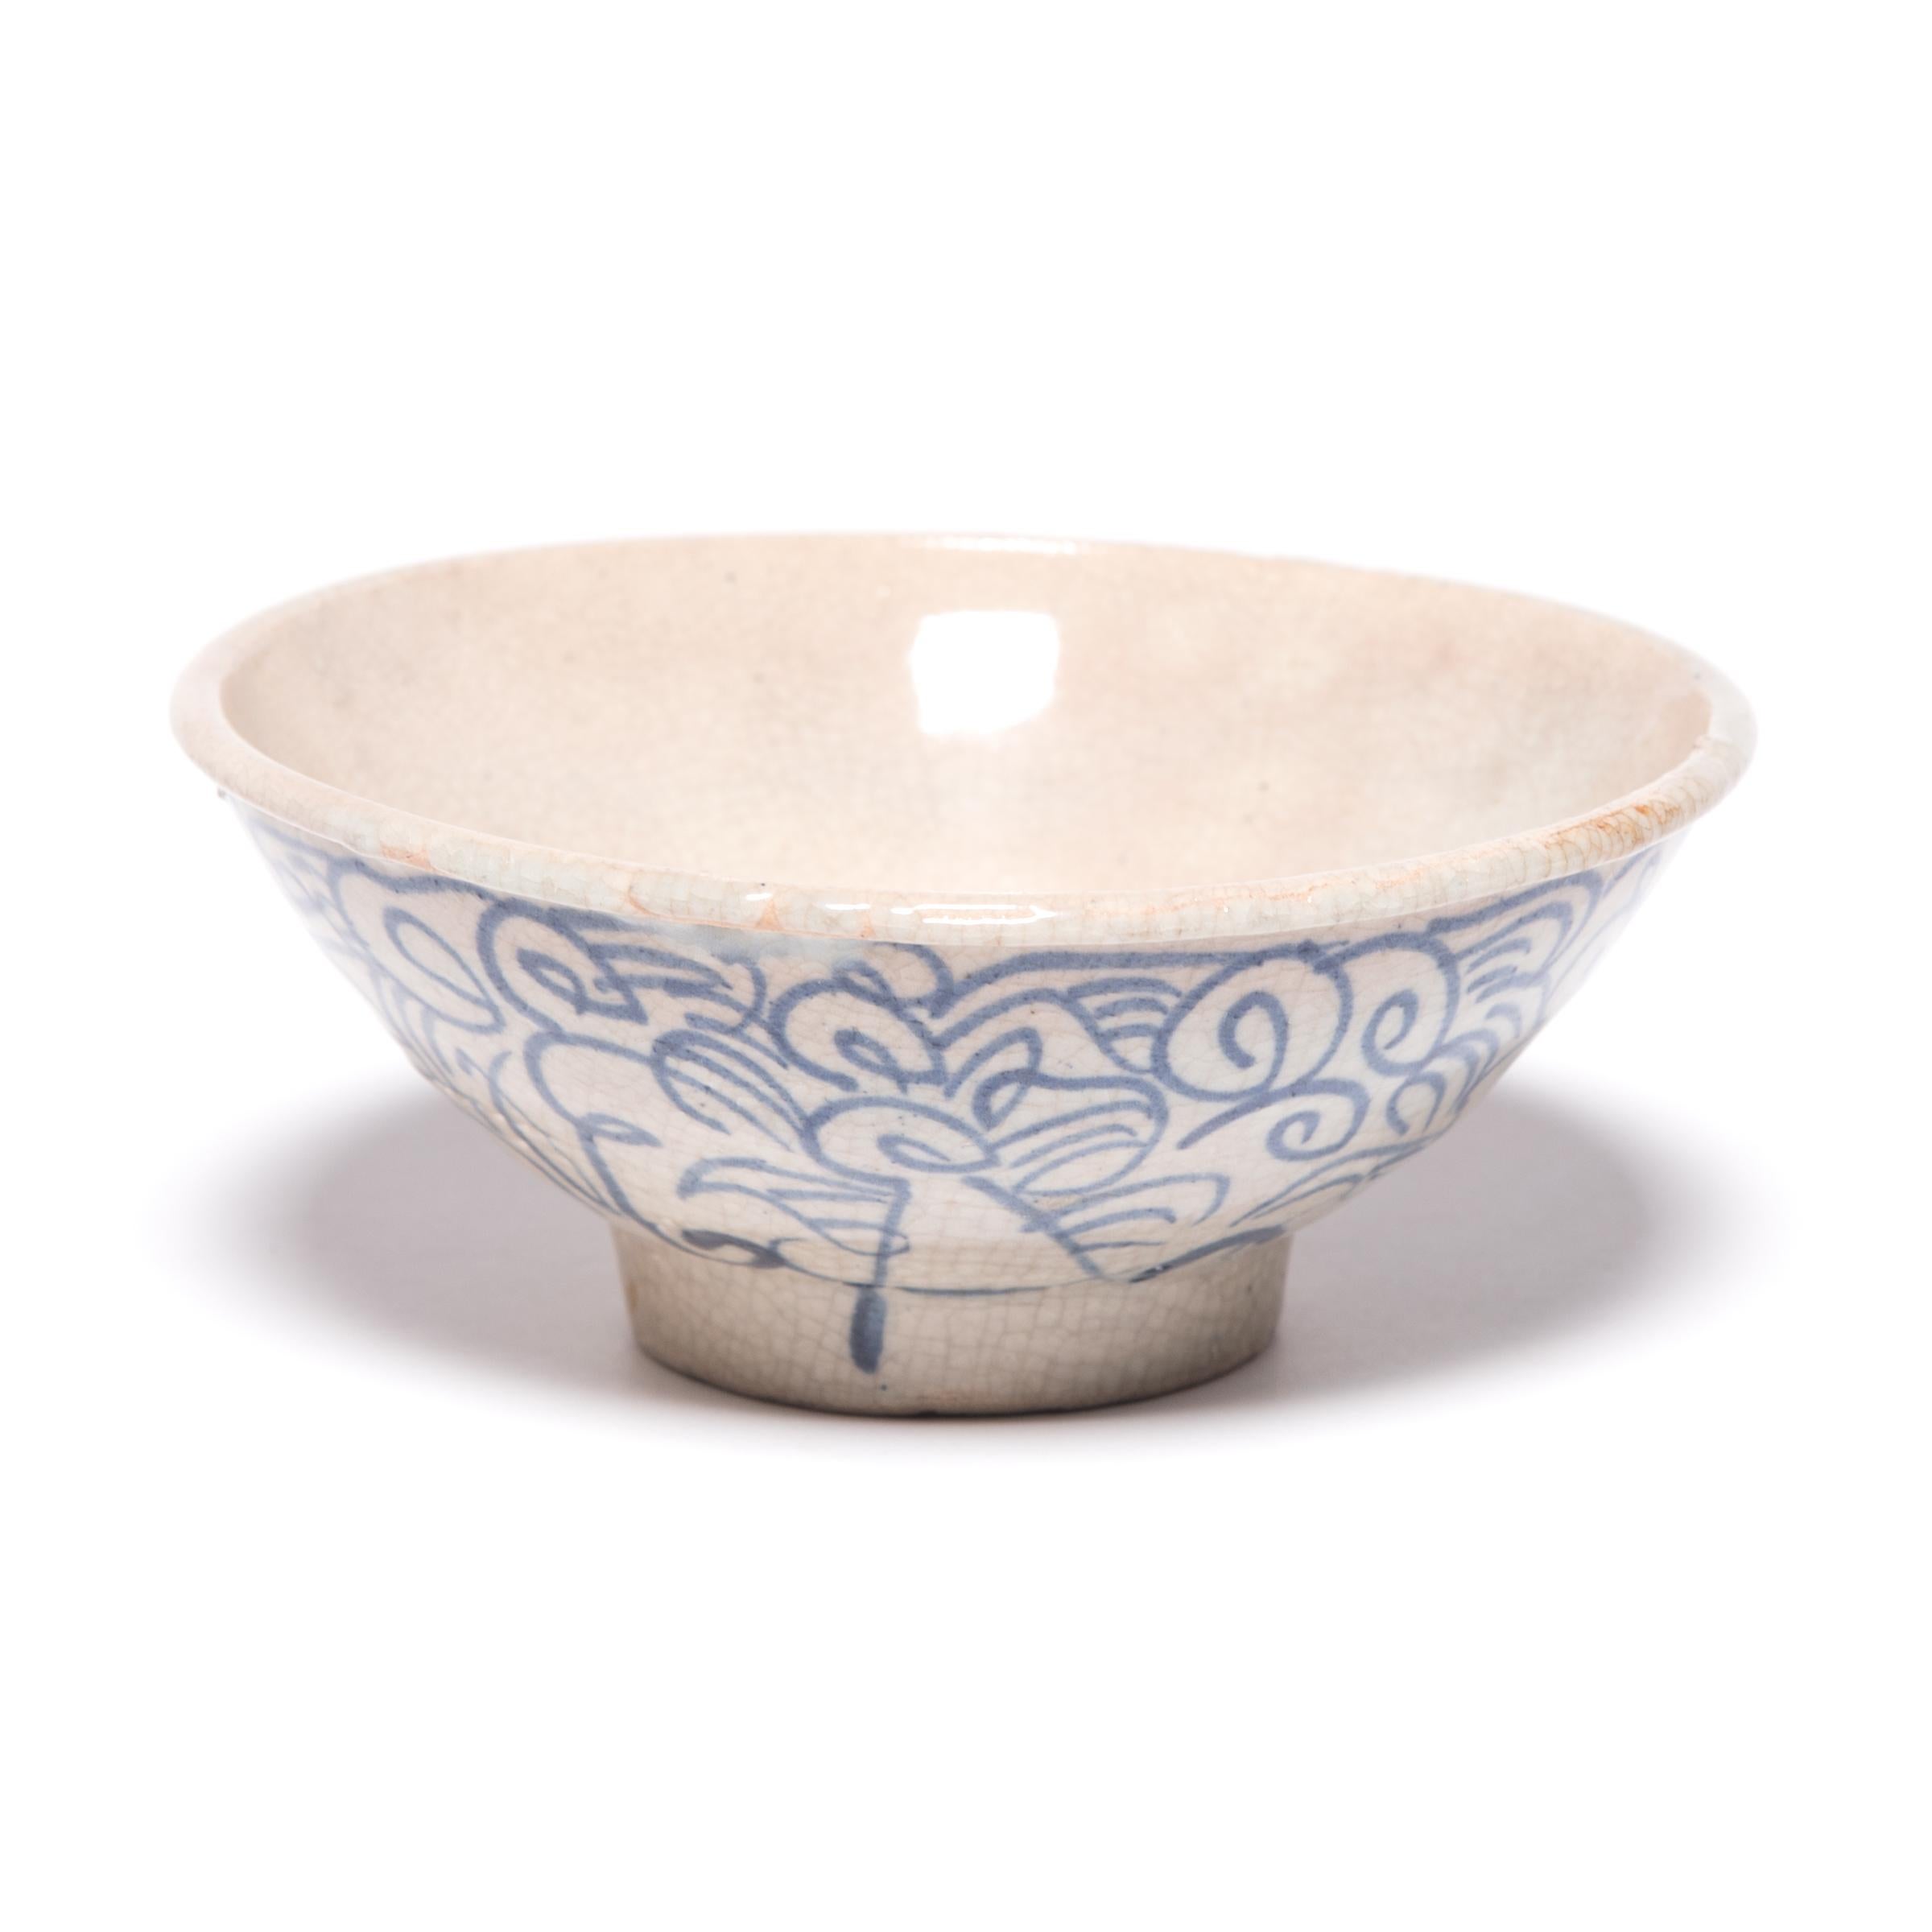 This late 19th century footed bowl would have been offered by Chinese traders traveling along the Silk Road in exchange for spices or gems. The Chinese artisans who hand painted it with scrolls, loops, and crossed lines thought the meandering